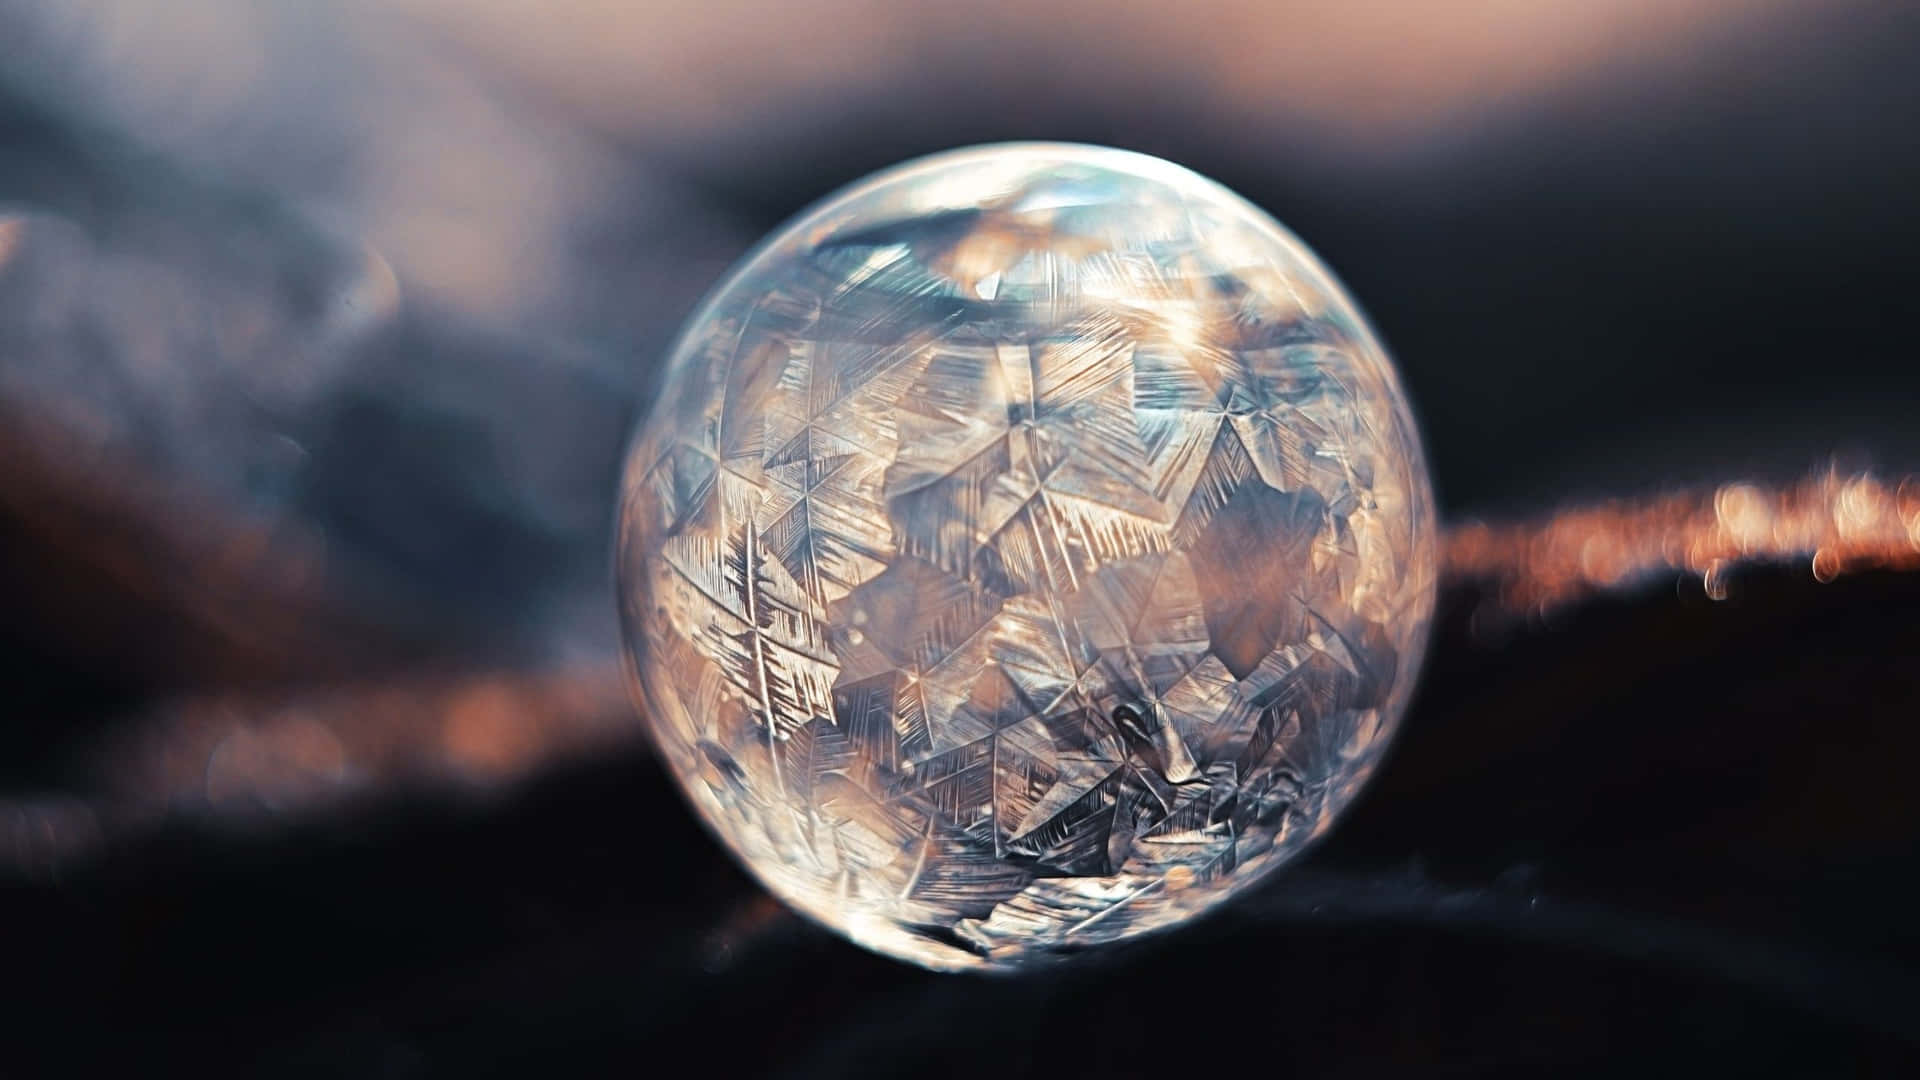 Mysterious Crystal Ball on a Dark Background Wallpaper